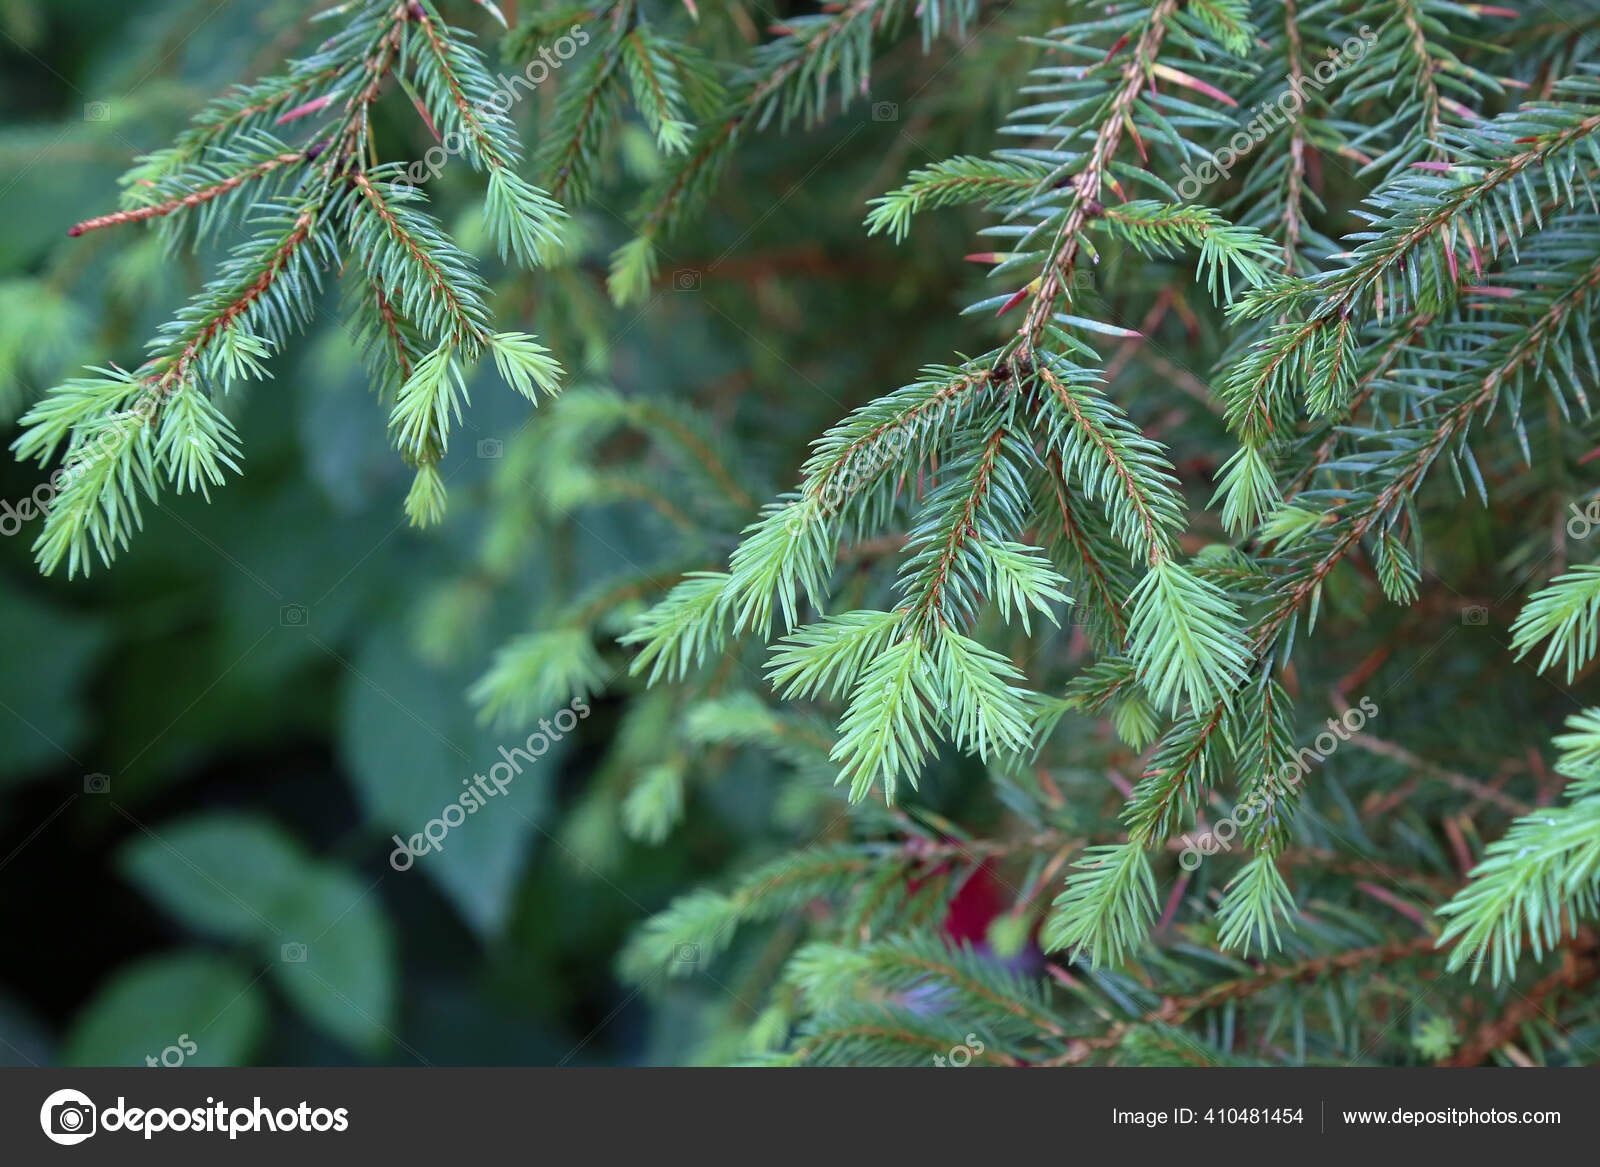 Pine branches, Stock image